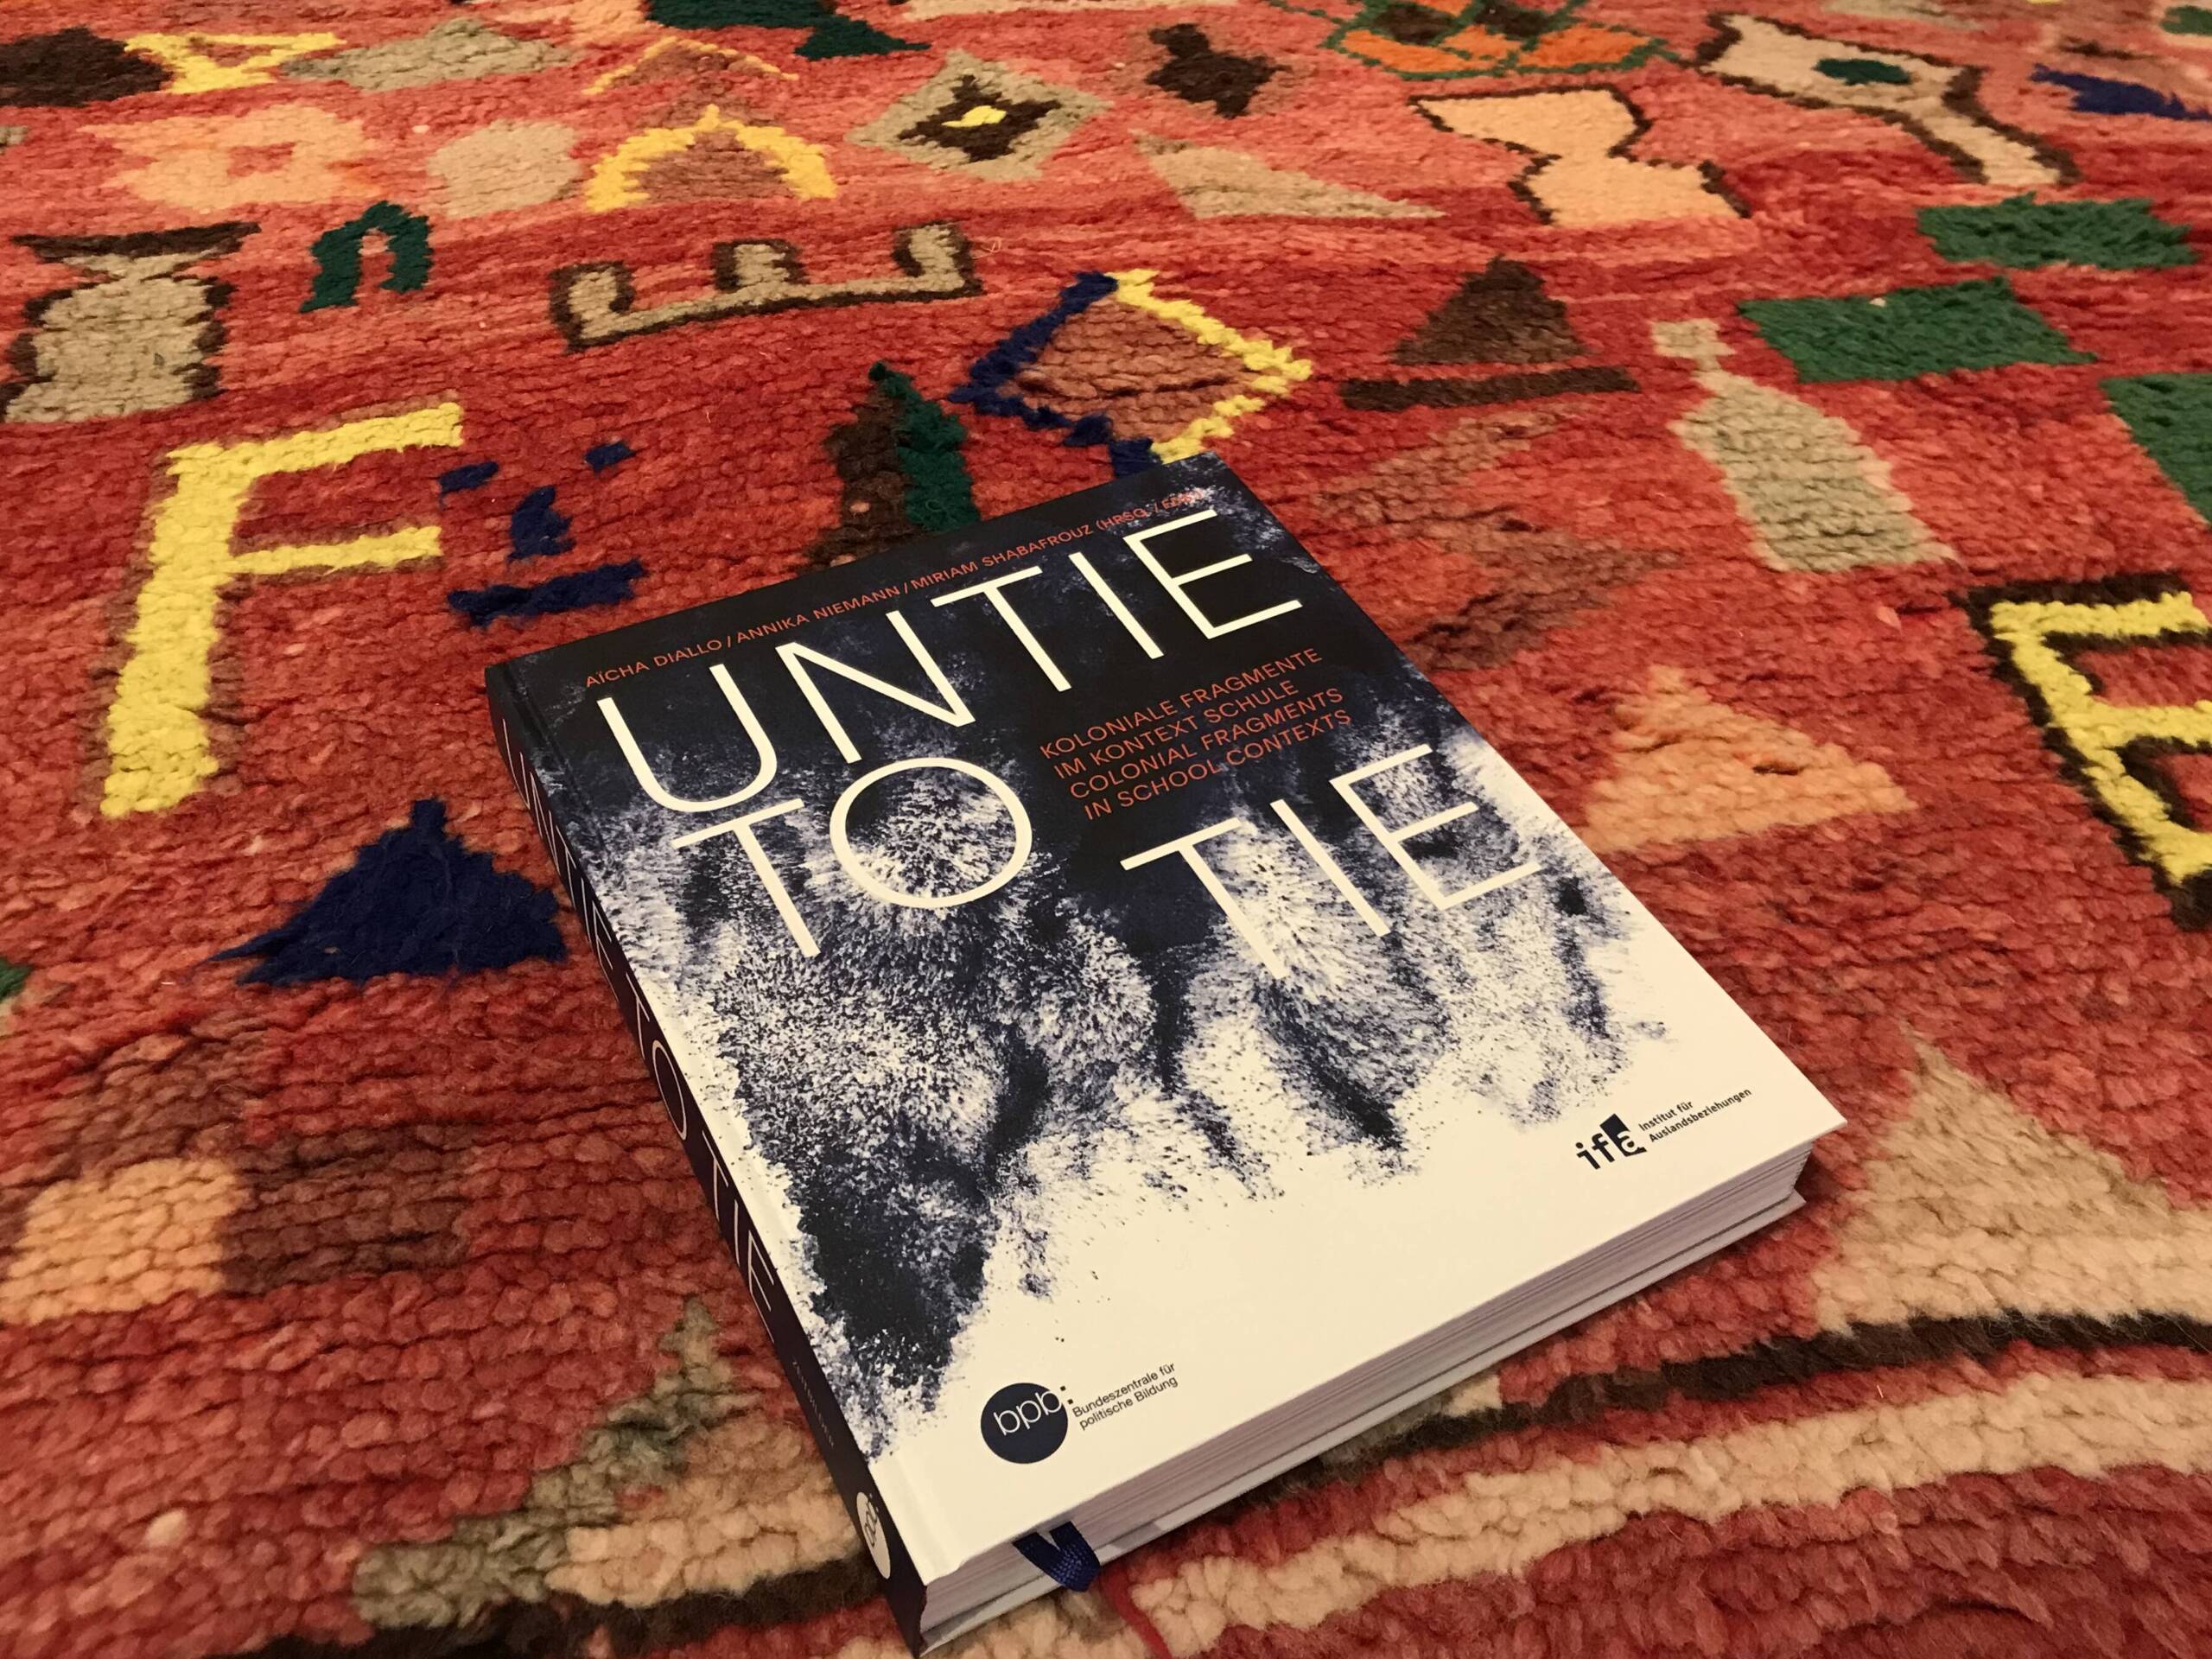 The book "Untie to tie" laying on a moroccan carpet